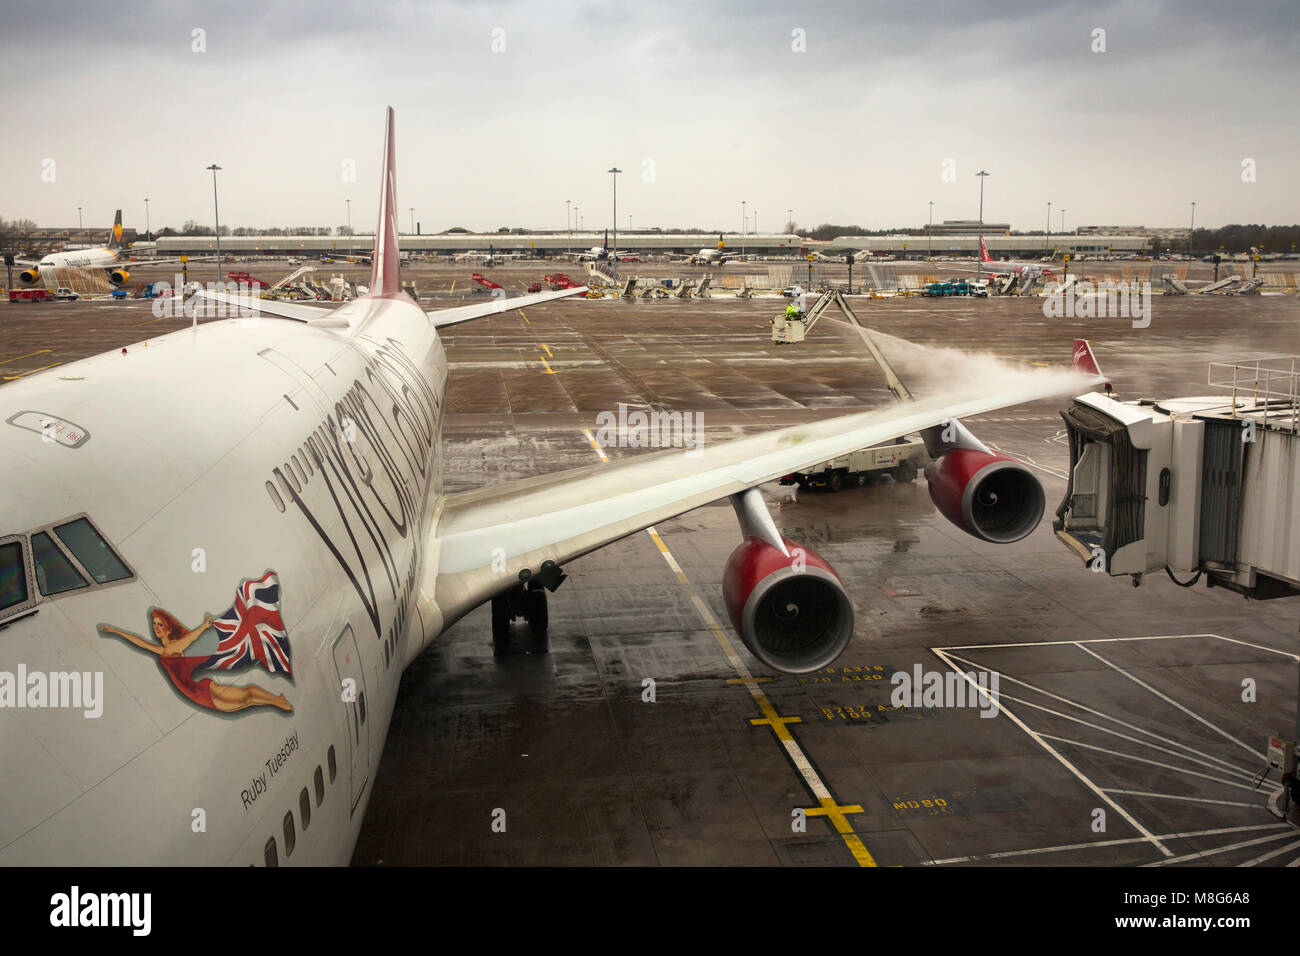 UK, England, Manchester Airport, workers de-icing Virgin Atlantic Boeing 747-41R aircraft in extremely cold winter weather Stock Photo